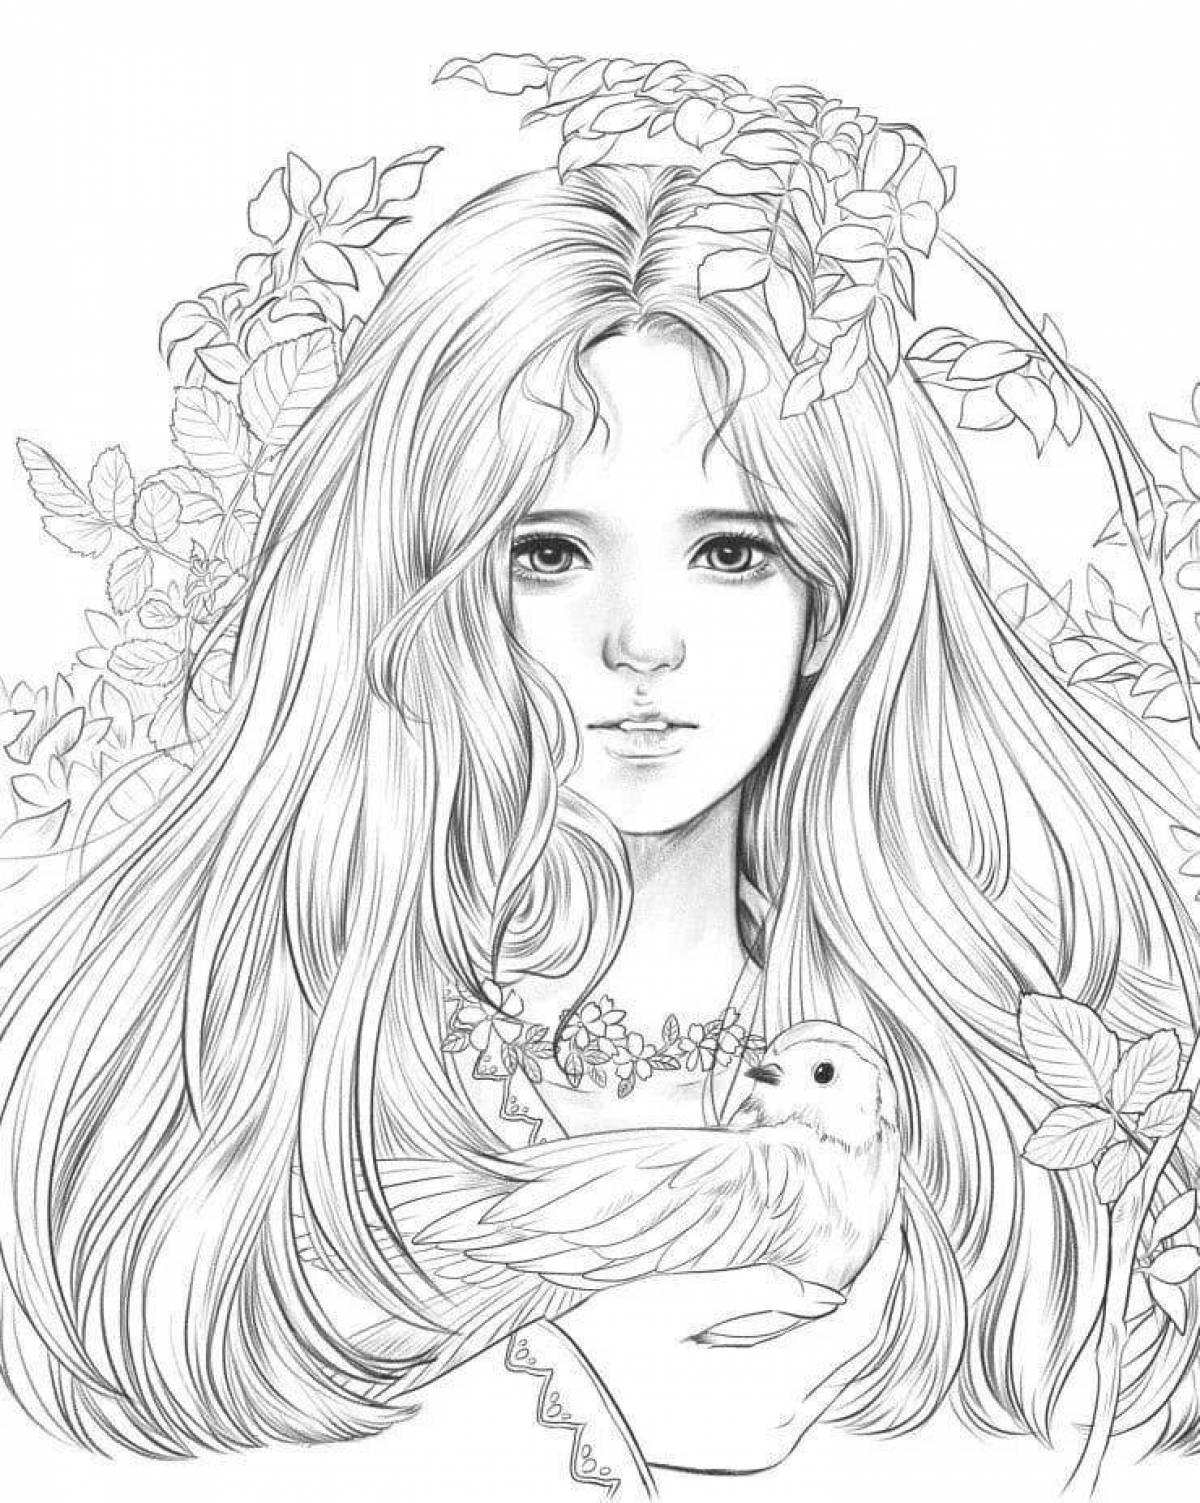 Amazing coloring pages for girls 15-16 years old